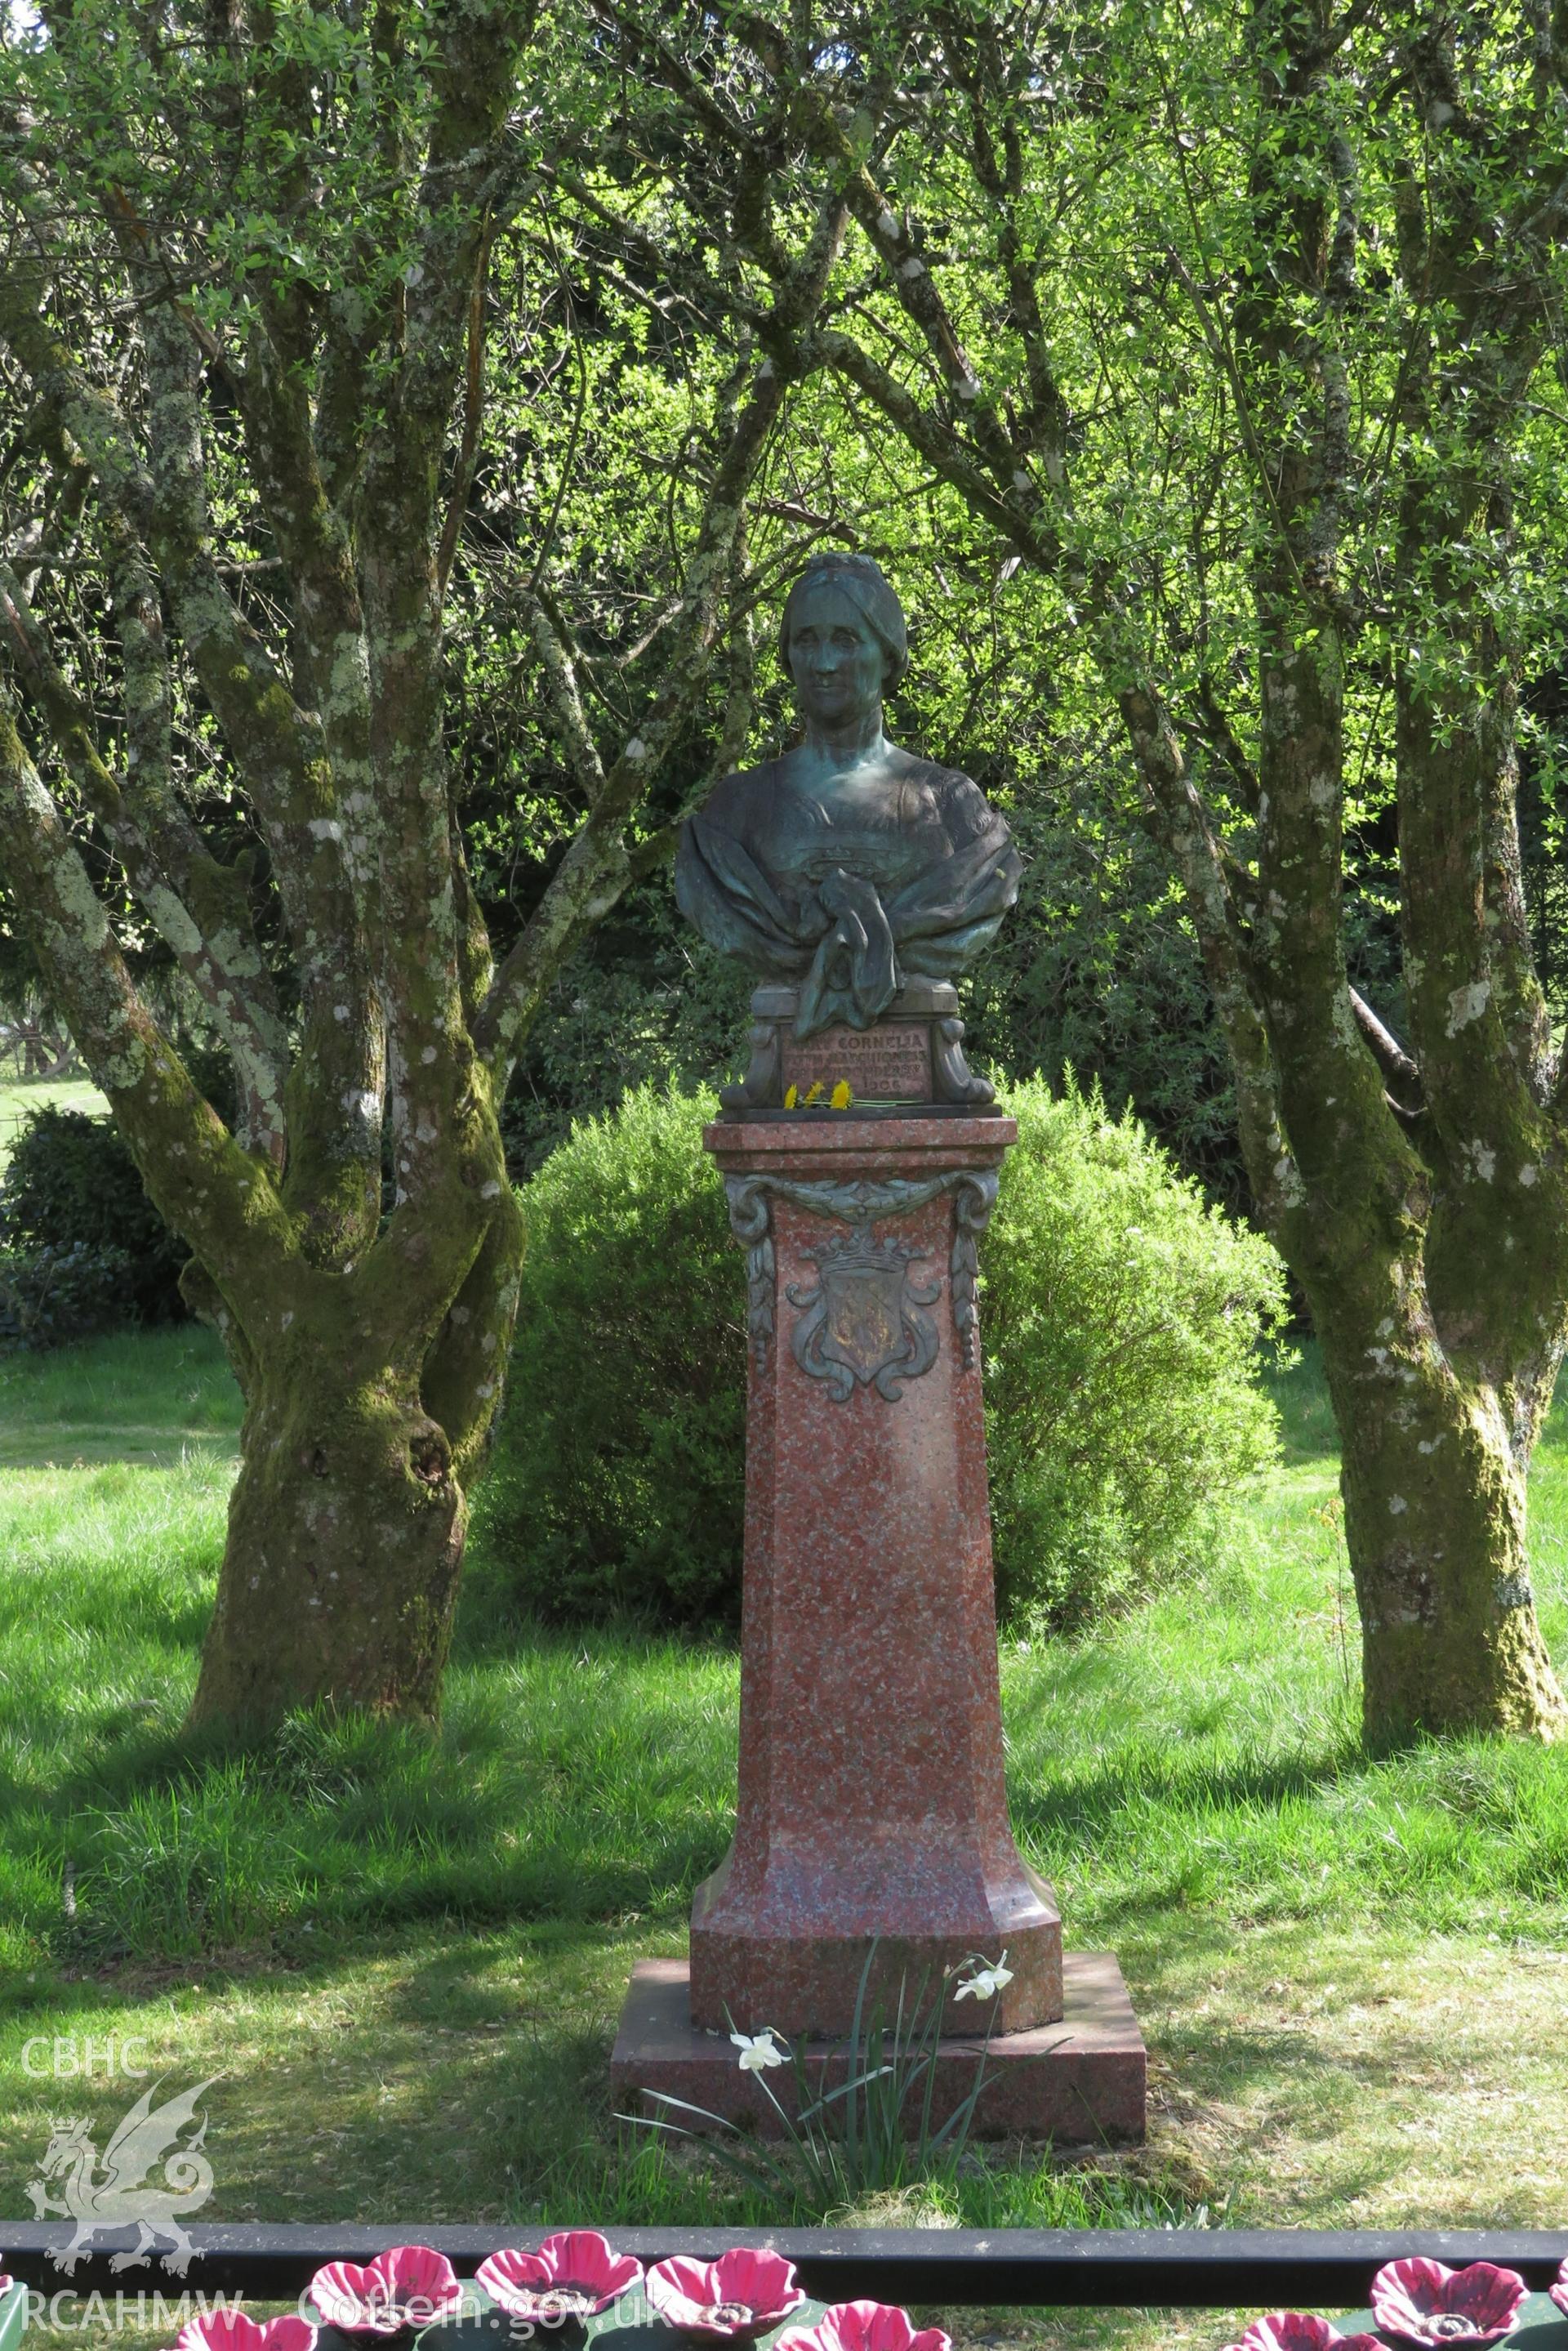 Full view of the bust of Mary Cornelia Vane-Tempest in the grounds of Plas, Machynlleth, from the north., April 2022.